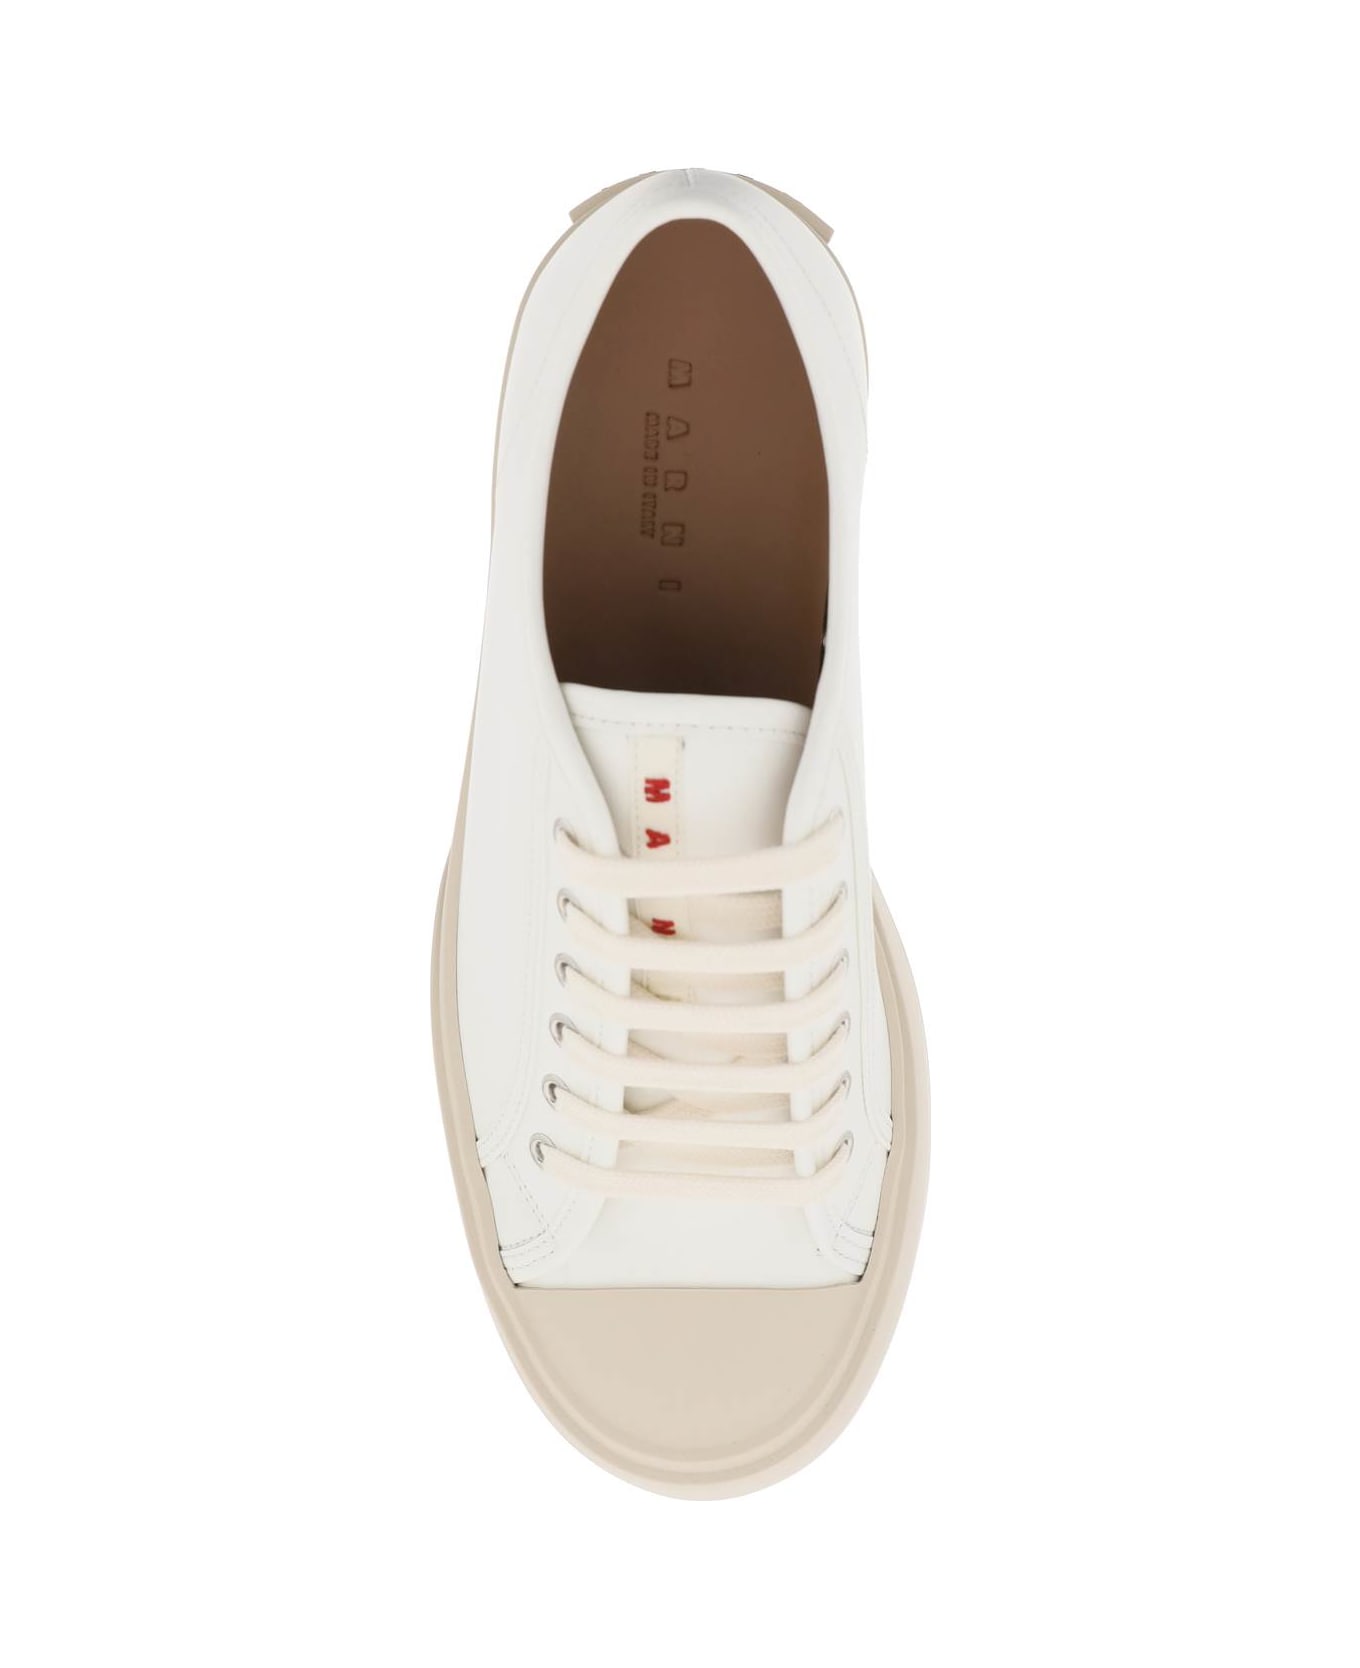 Marni Leather Pablo Sneakers - LILY WHITE (White) スニーカー